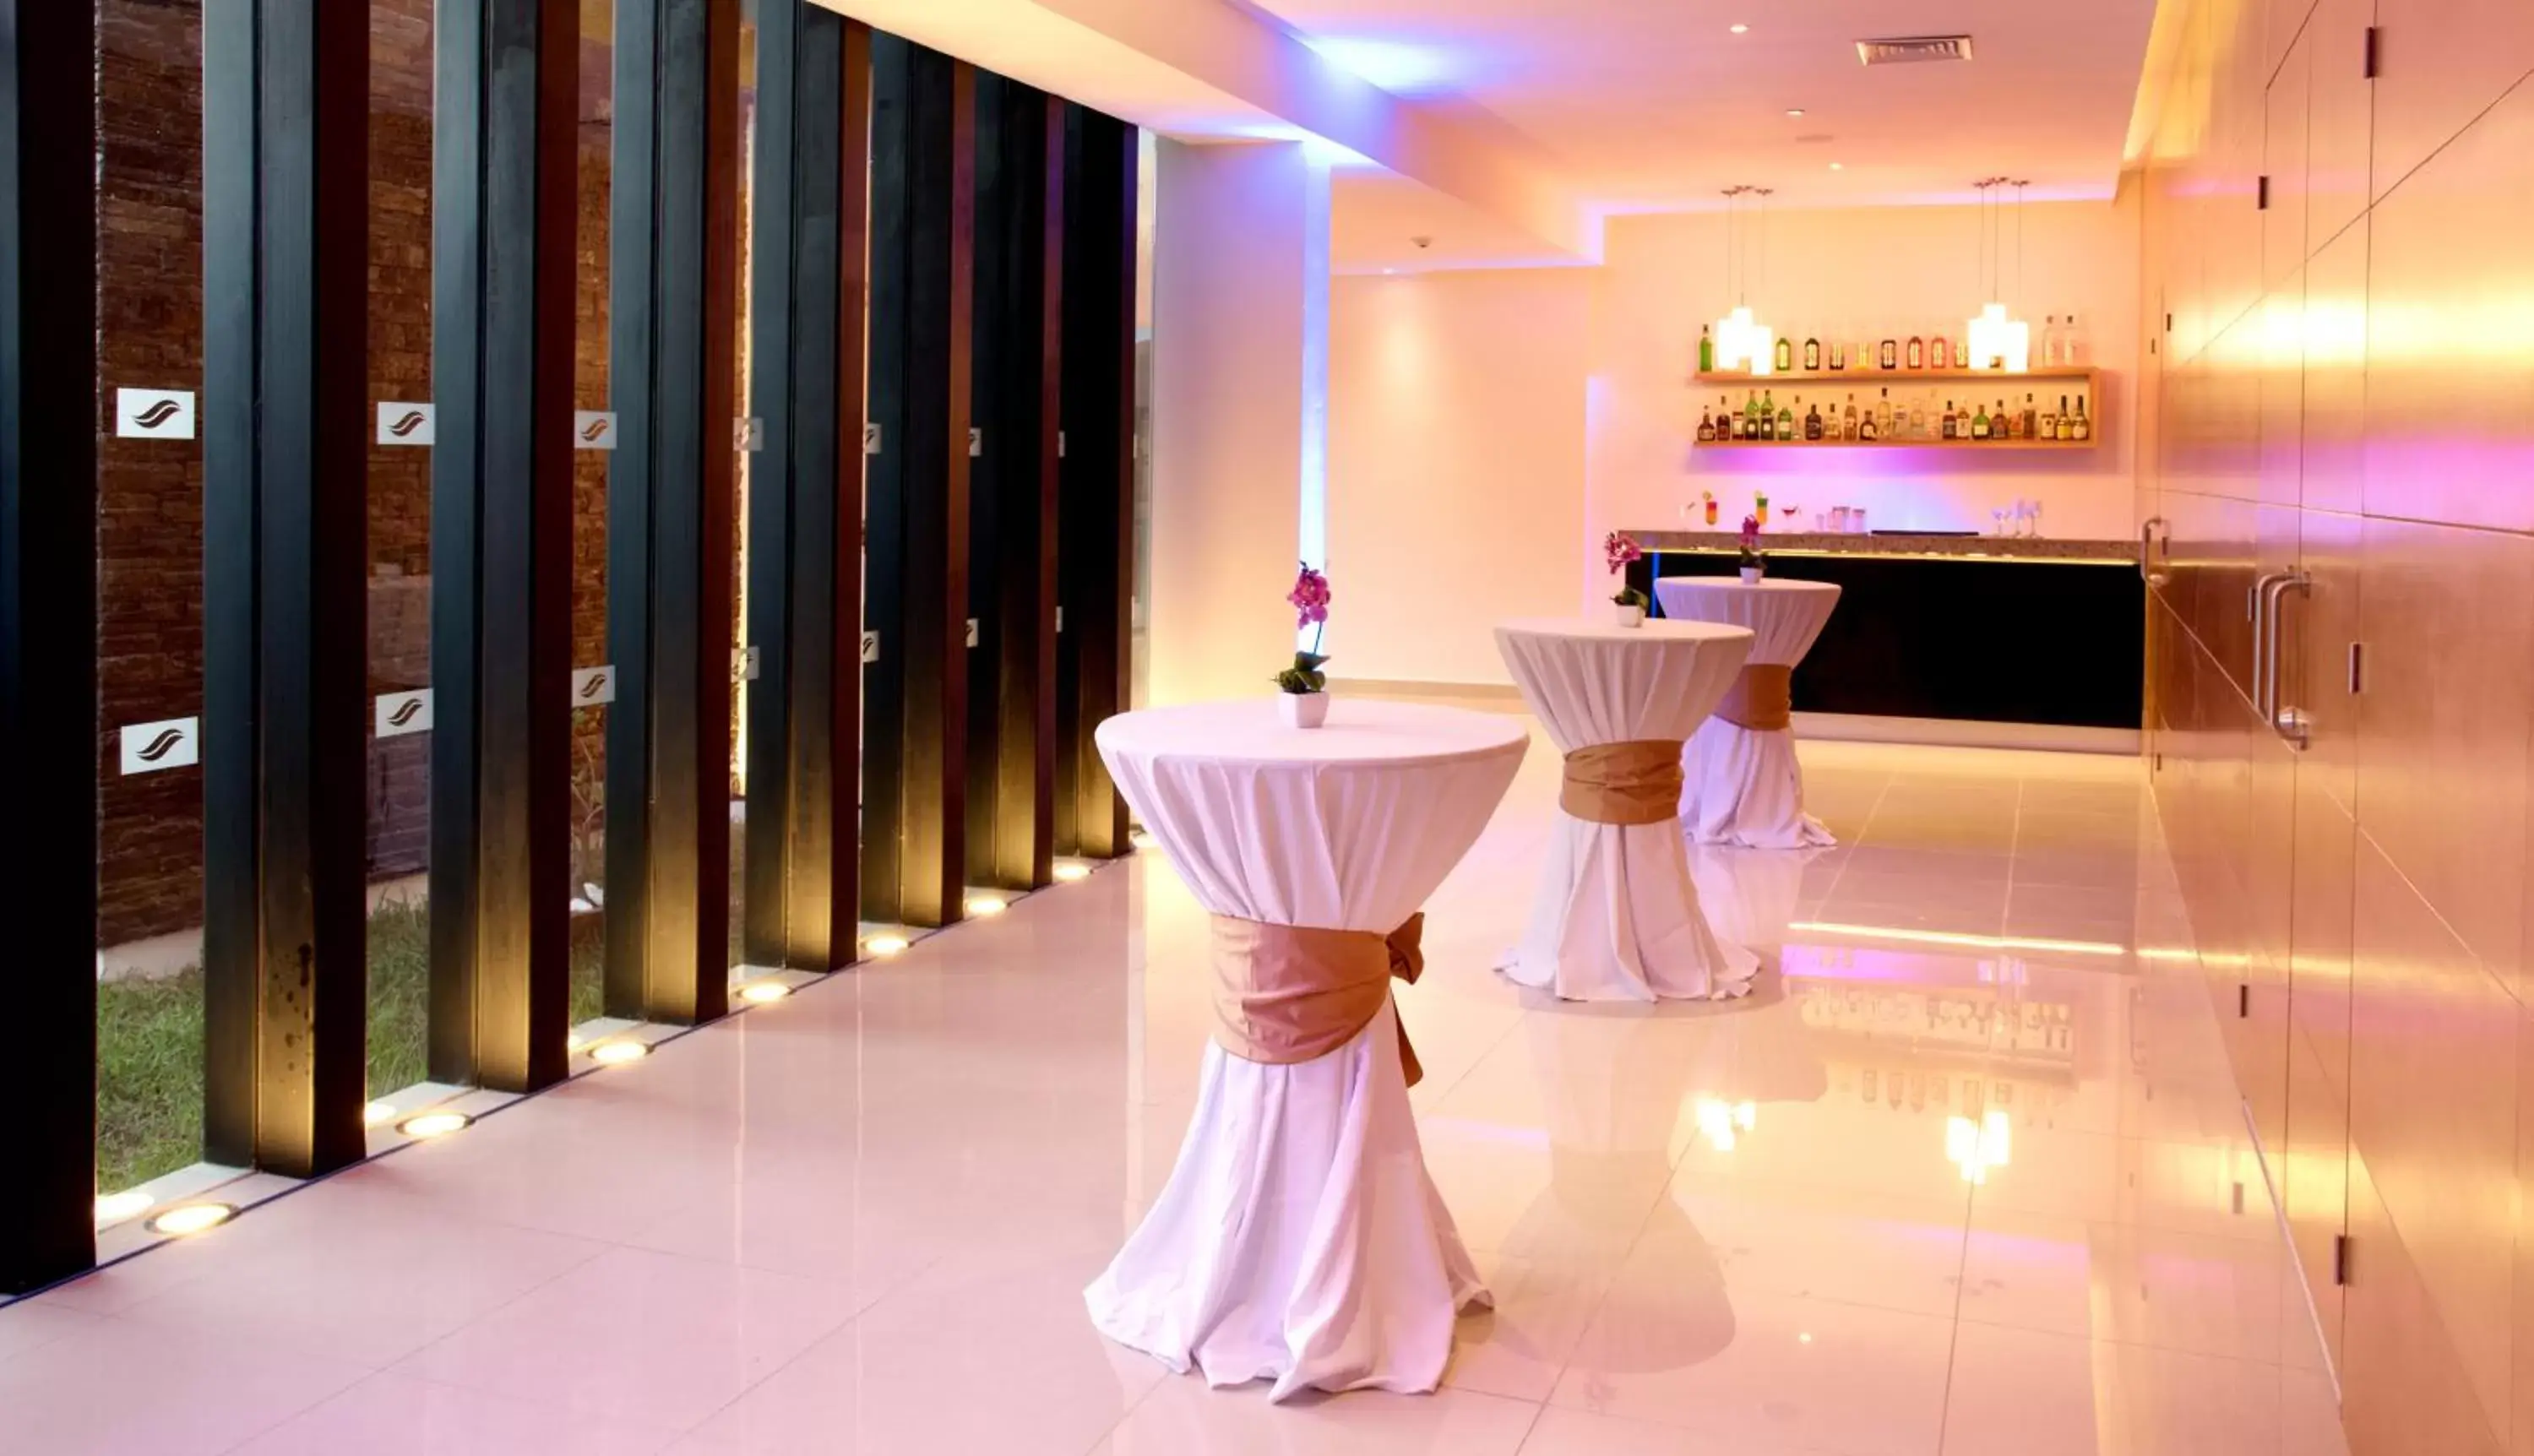 Banquet/Function facilities, Banquet Facilities in Cancun Bay Resort - All Inclusive